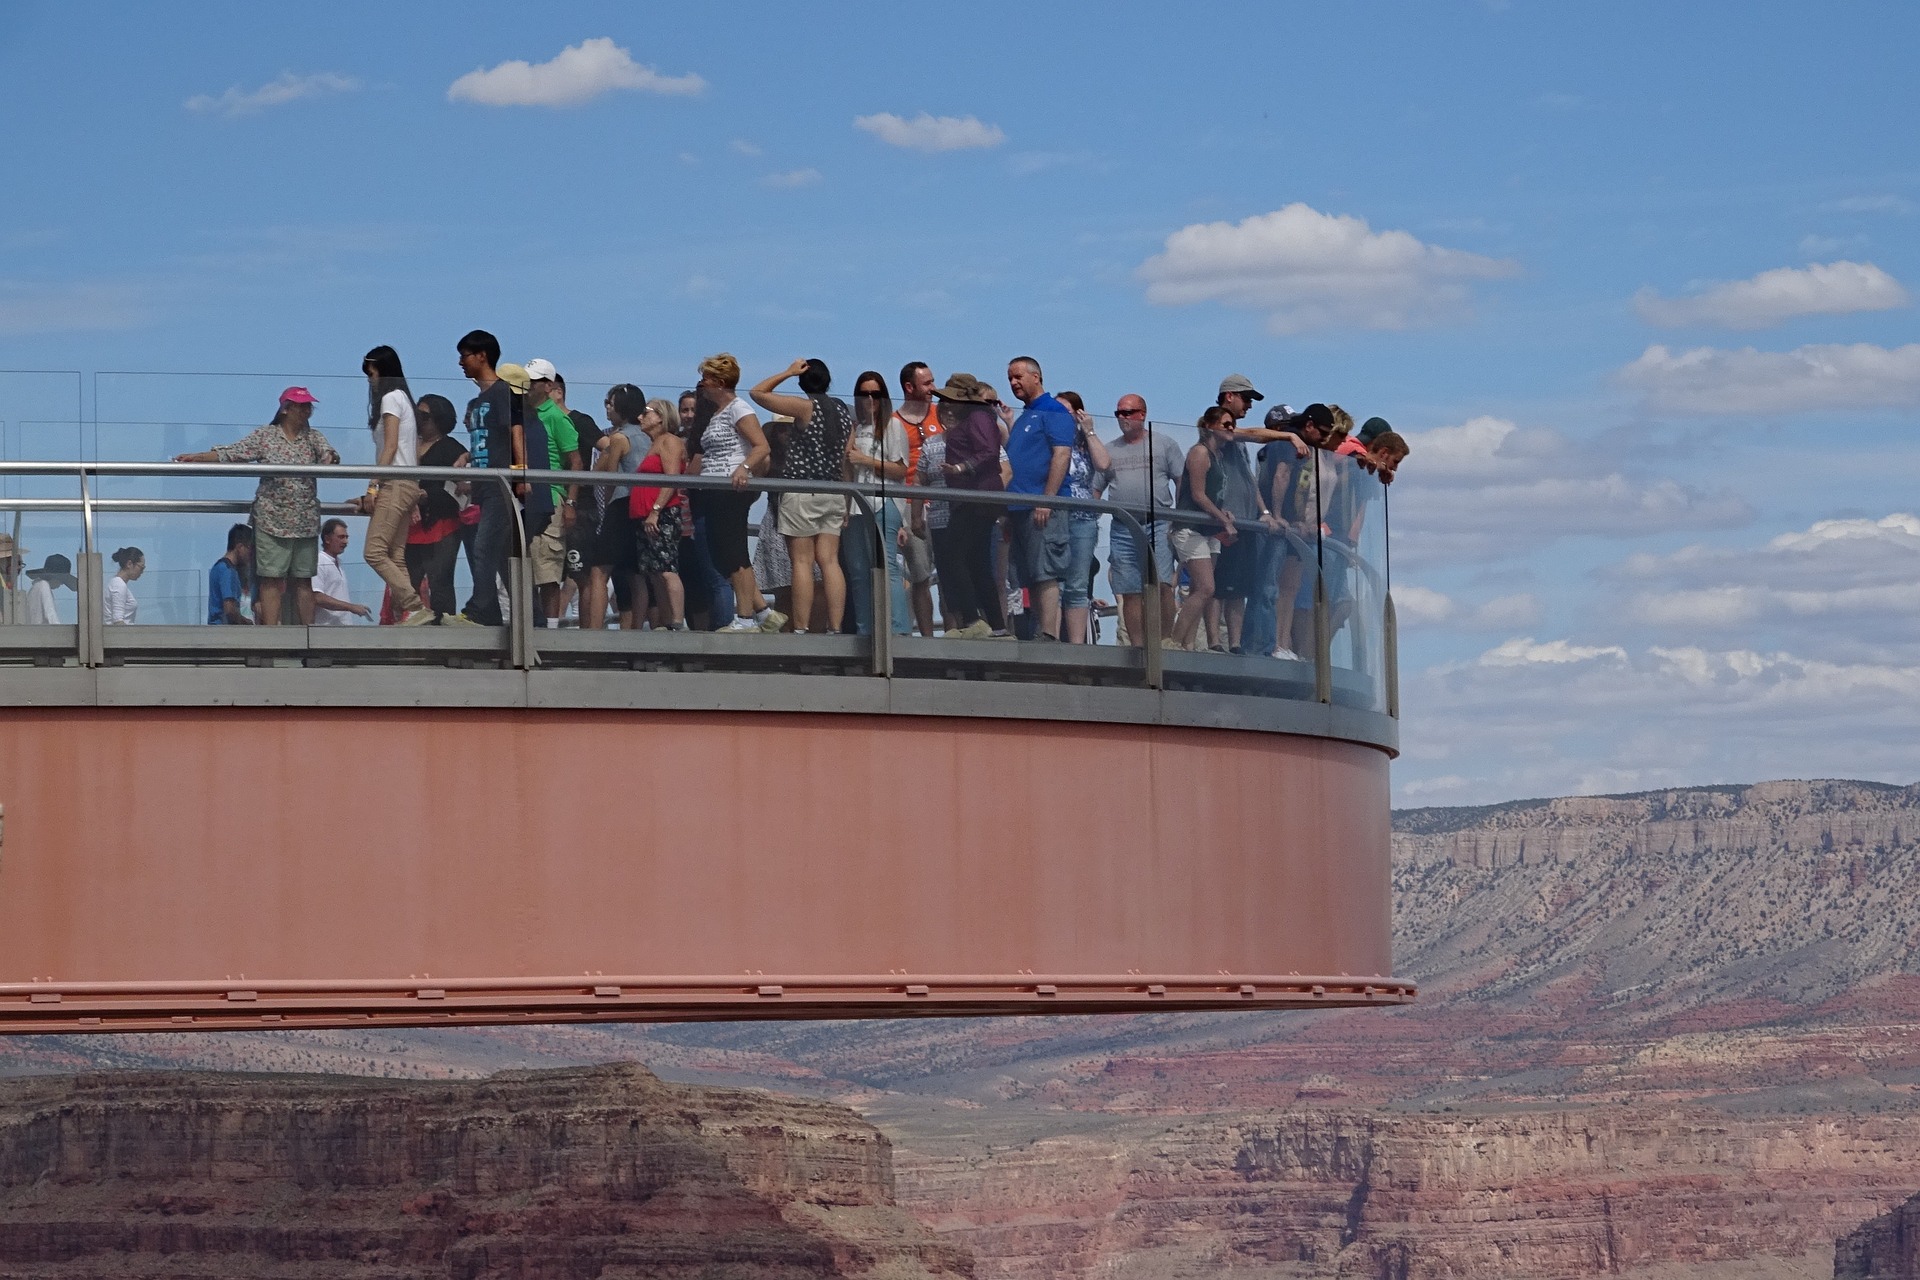 Best Grand Canyon experience - skywalk